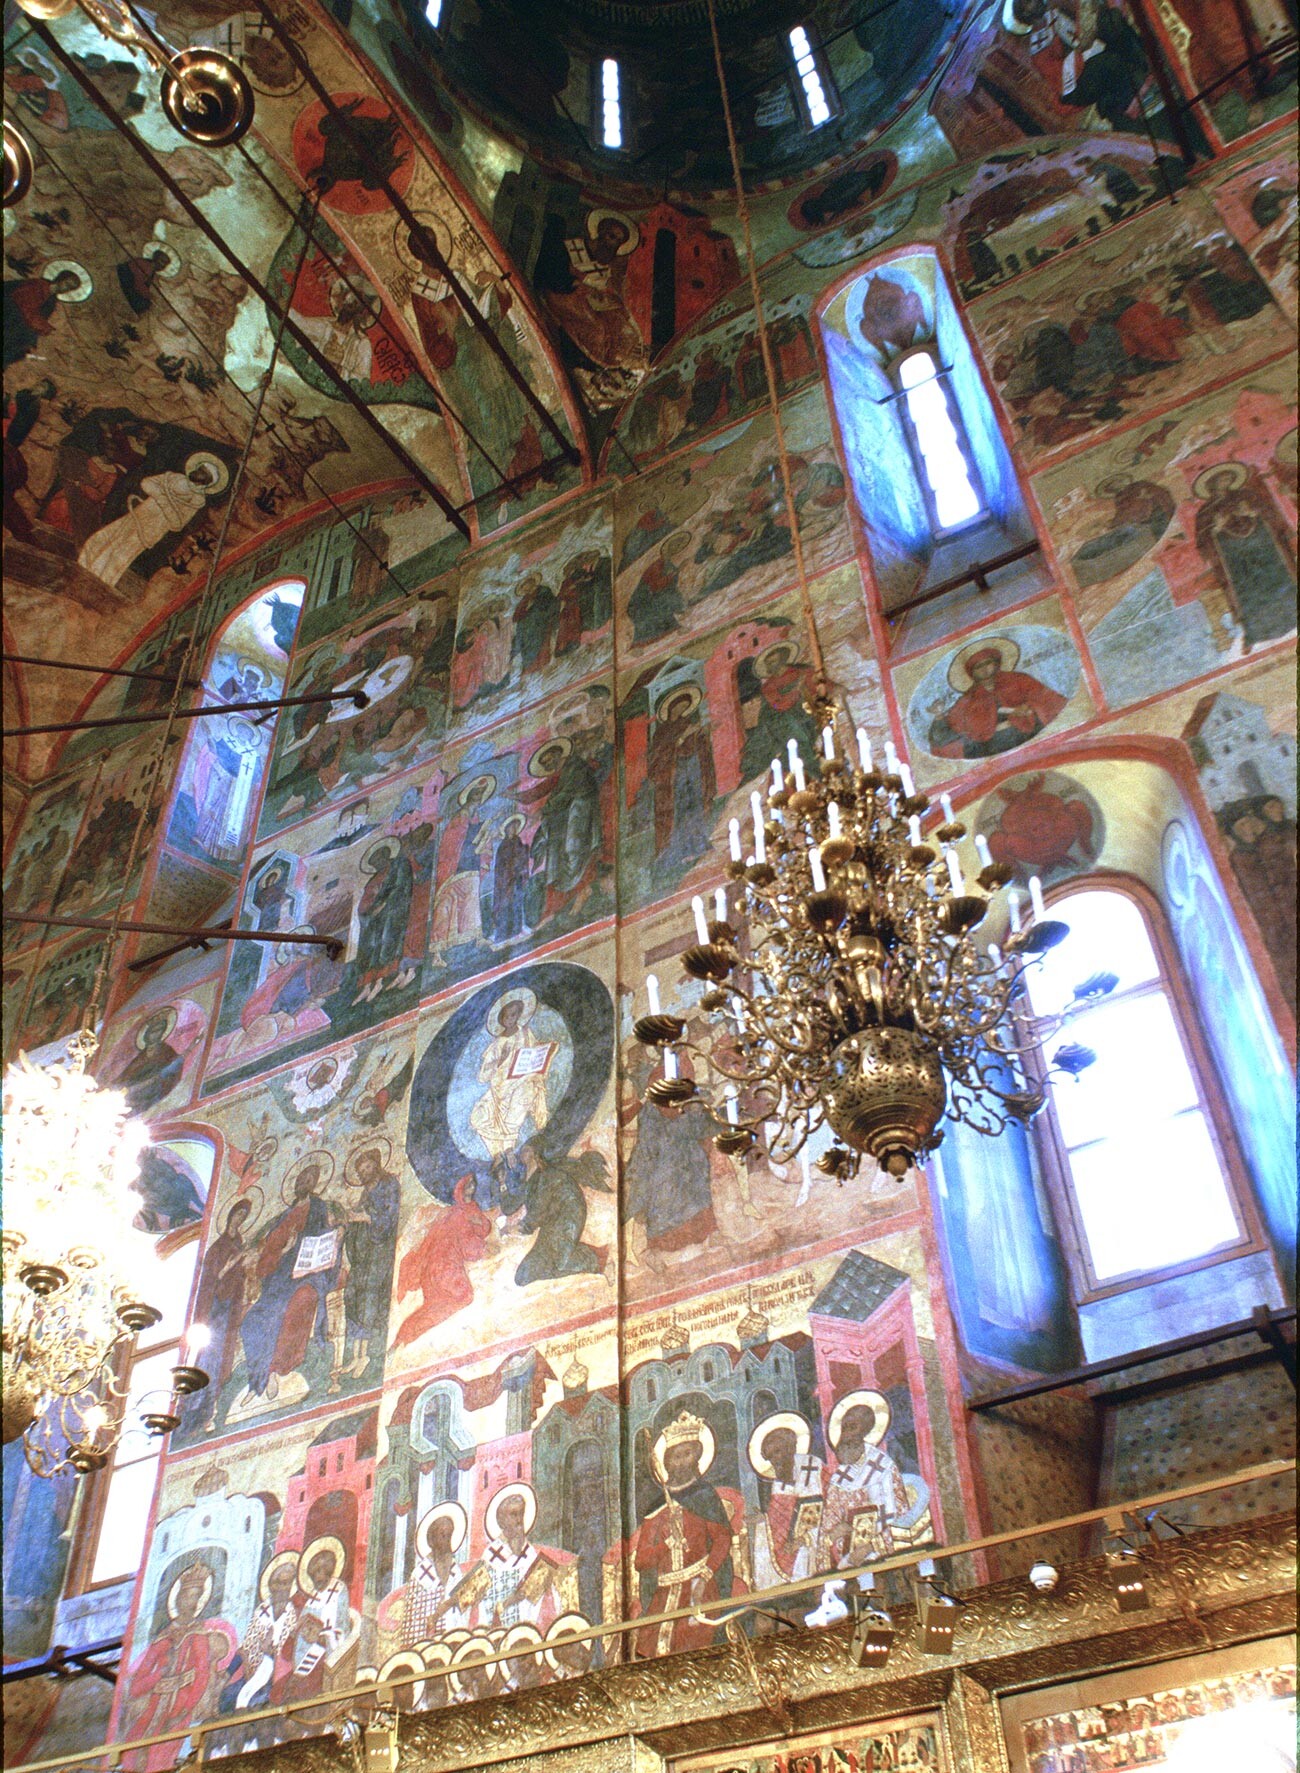 Dormition Cathedral, interior. North wall with frescoes of Ecumenical Councils (bottom row), veneration of Christ & scenes from life of Virgin Mary (upper row). July 11, 1999